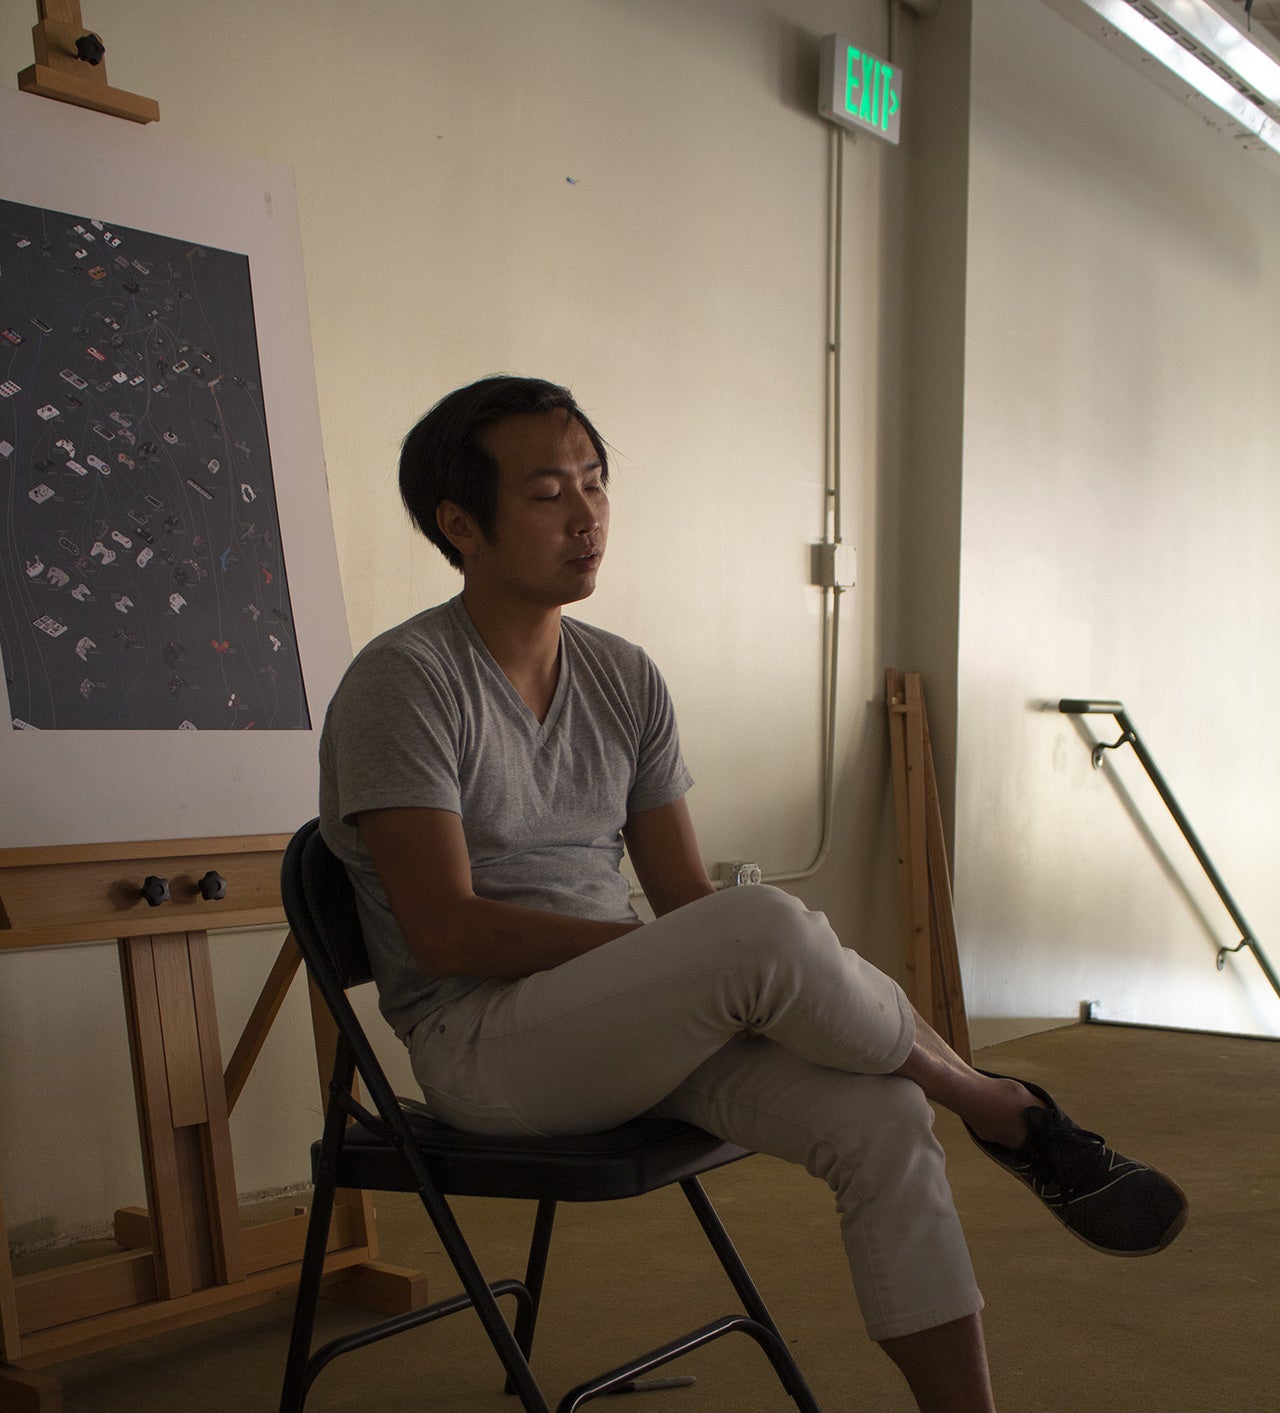 Shem Nguyen discusses The MADE's mission at its new building. (Photo: Kotaku)